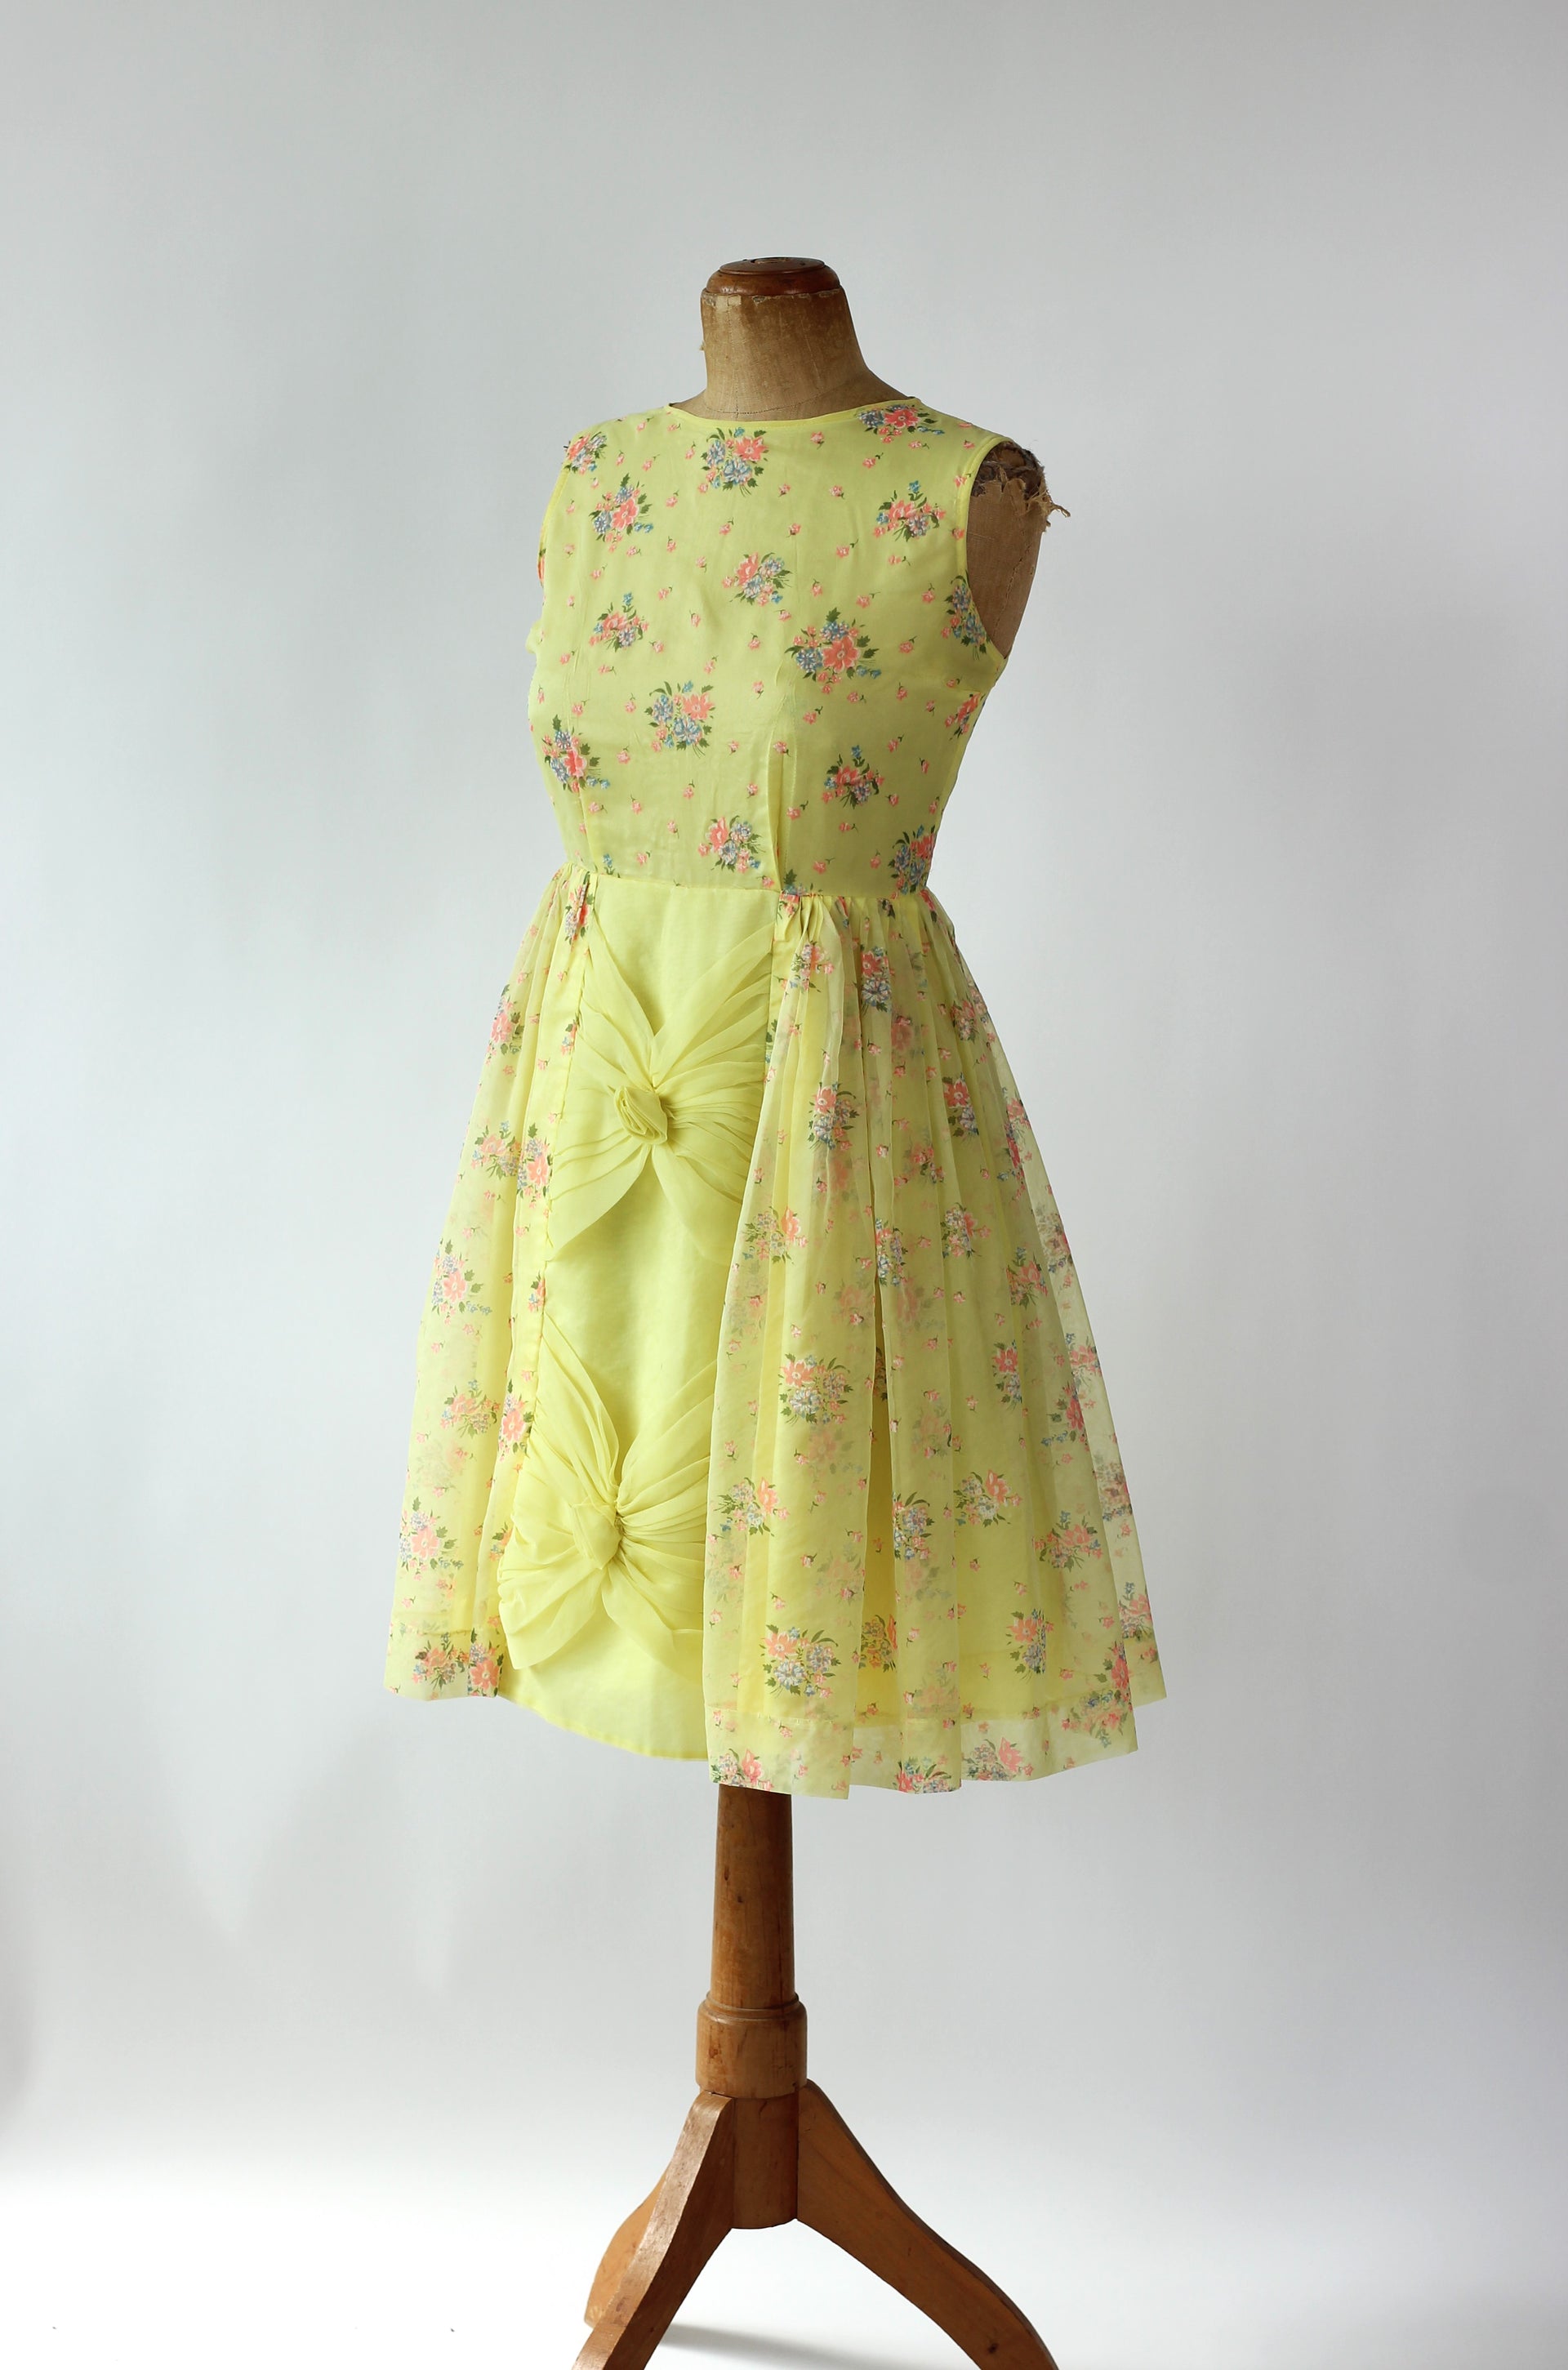 1950s Yellow Sheer Dress with Flower Print//Size M